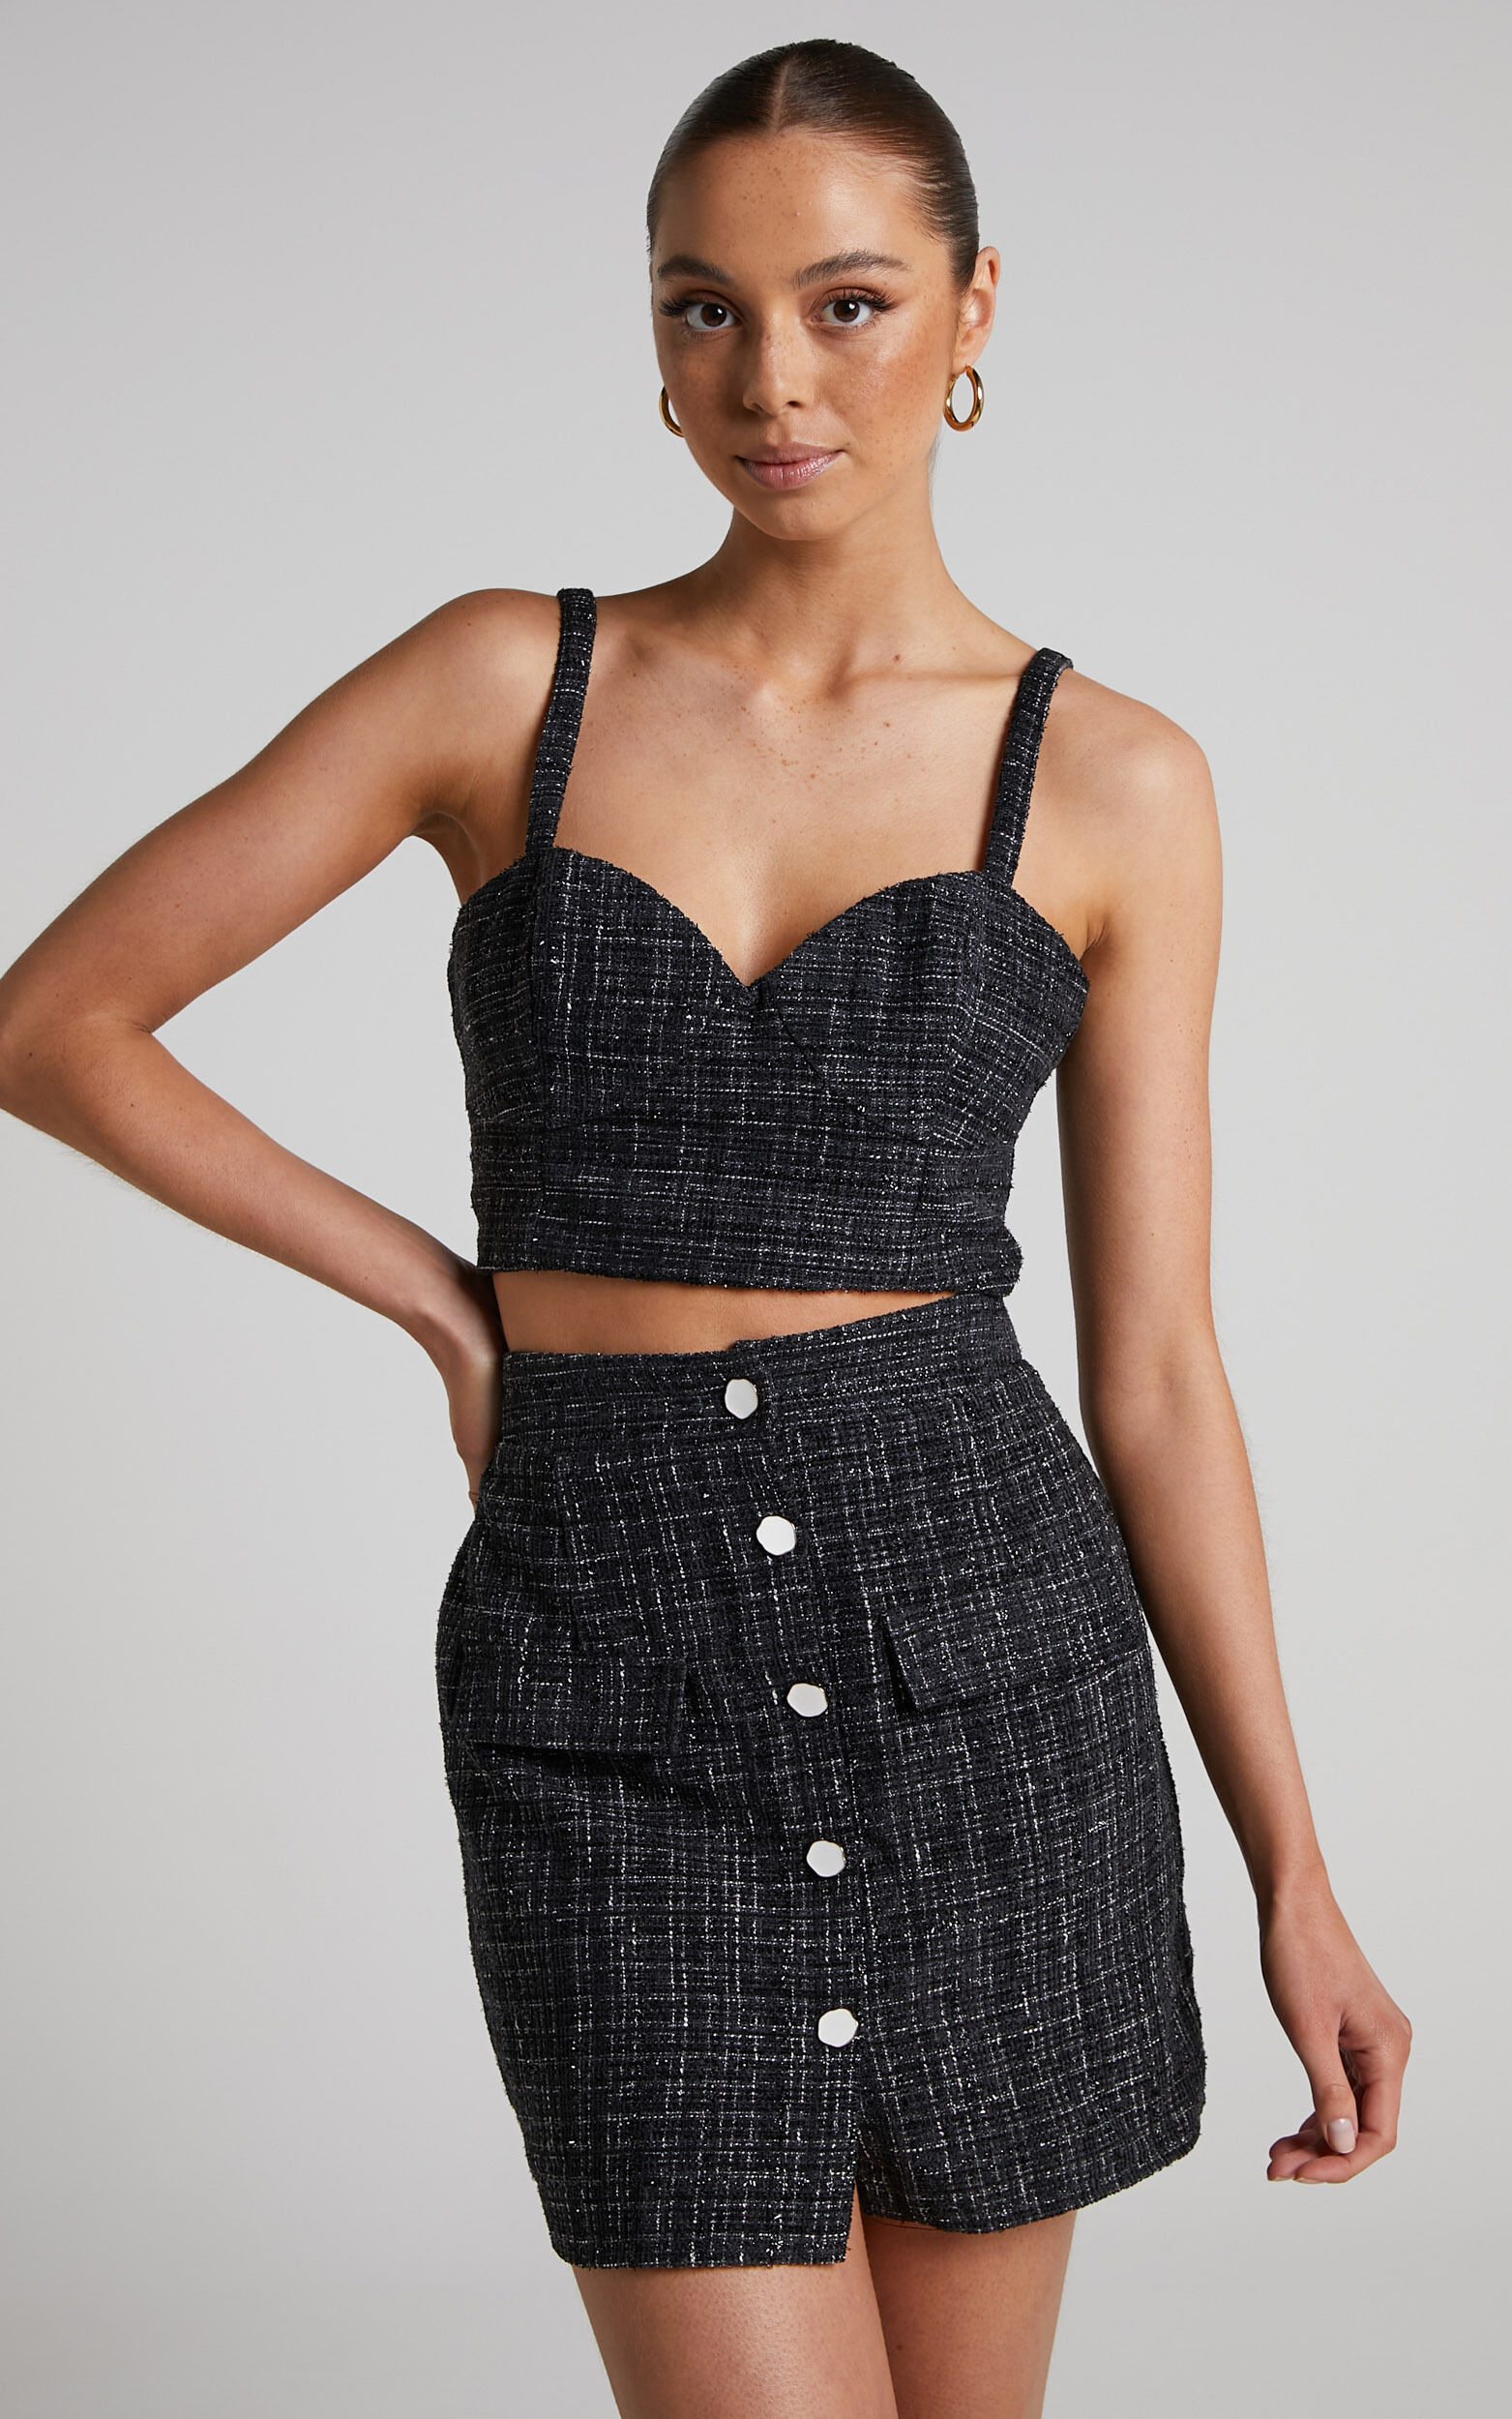 Bjorn Two Piece Set - Boucle Tweed Sweetheart Bralette and Button Up Mini Skirt in Black - 04, BLK1, super-hi-res image number null